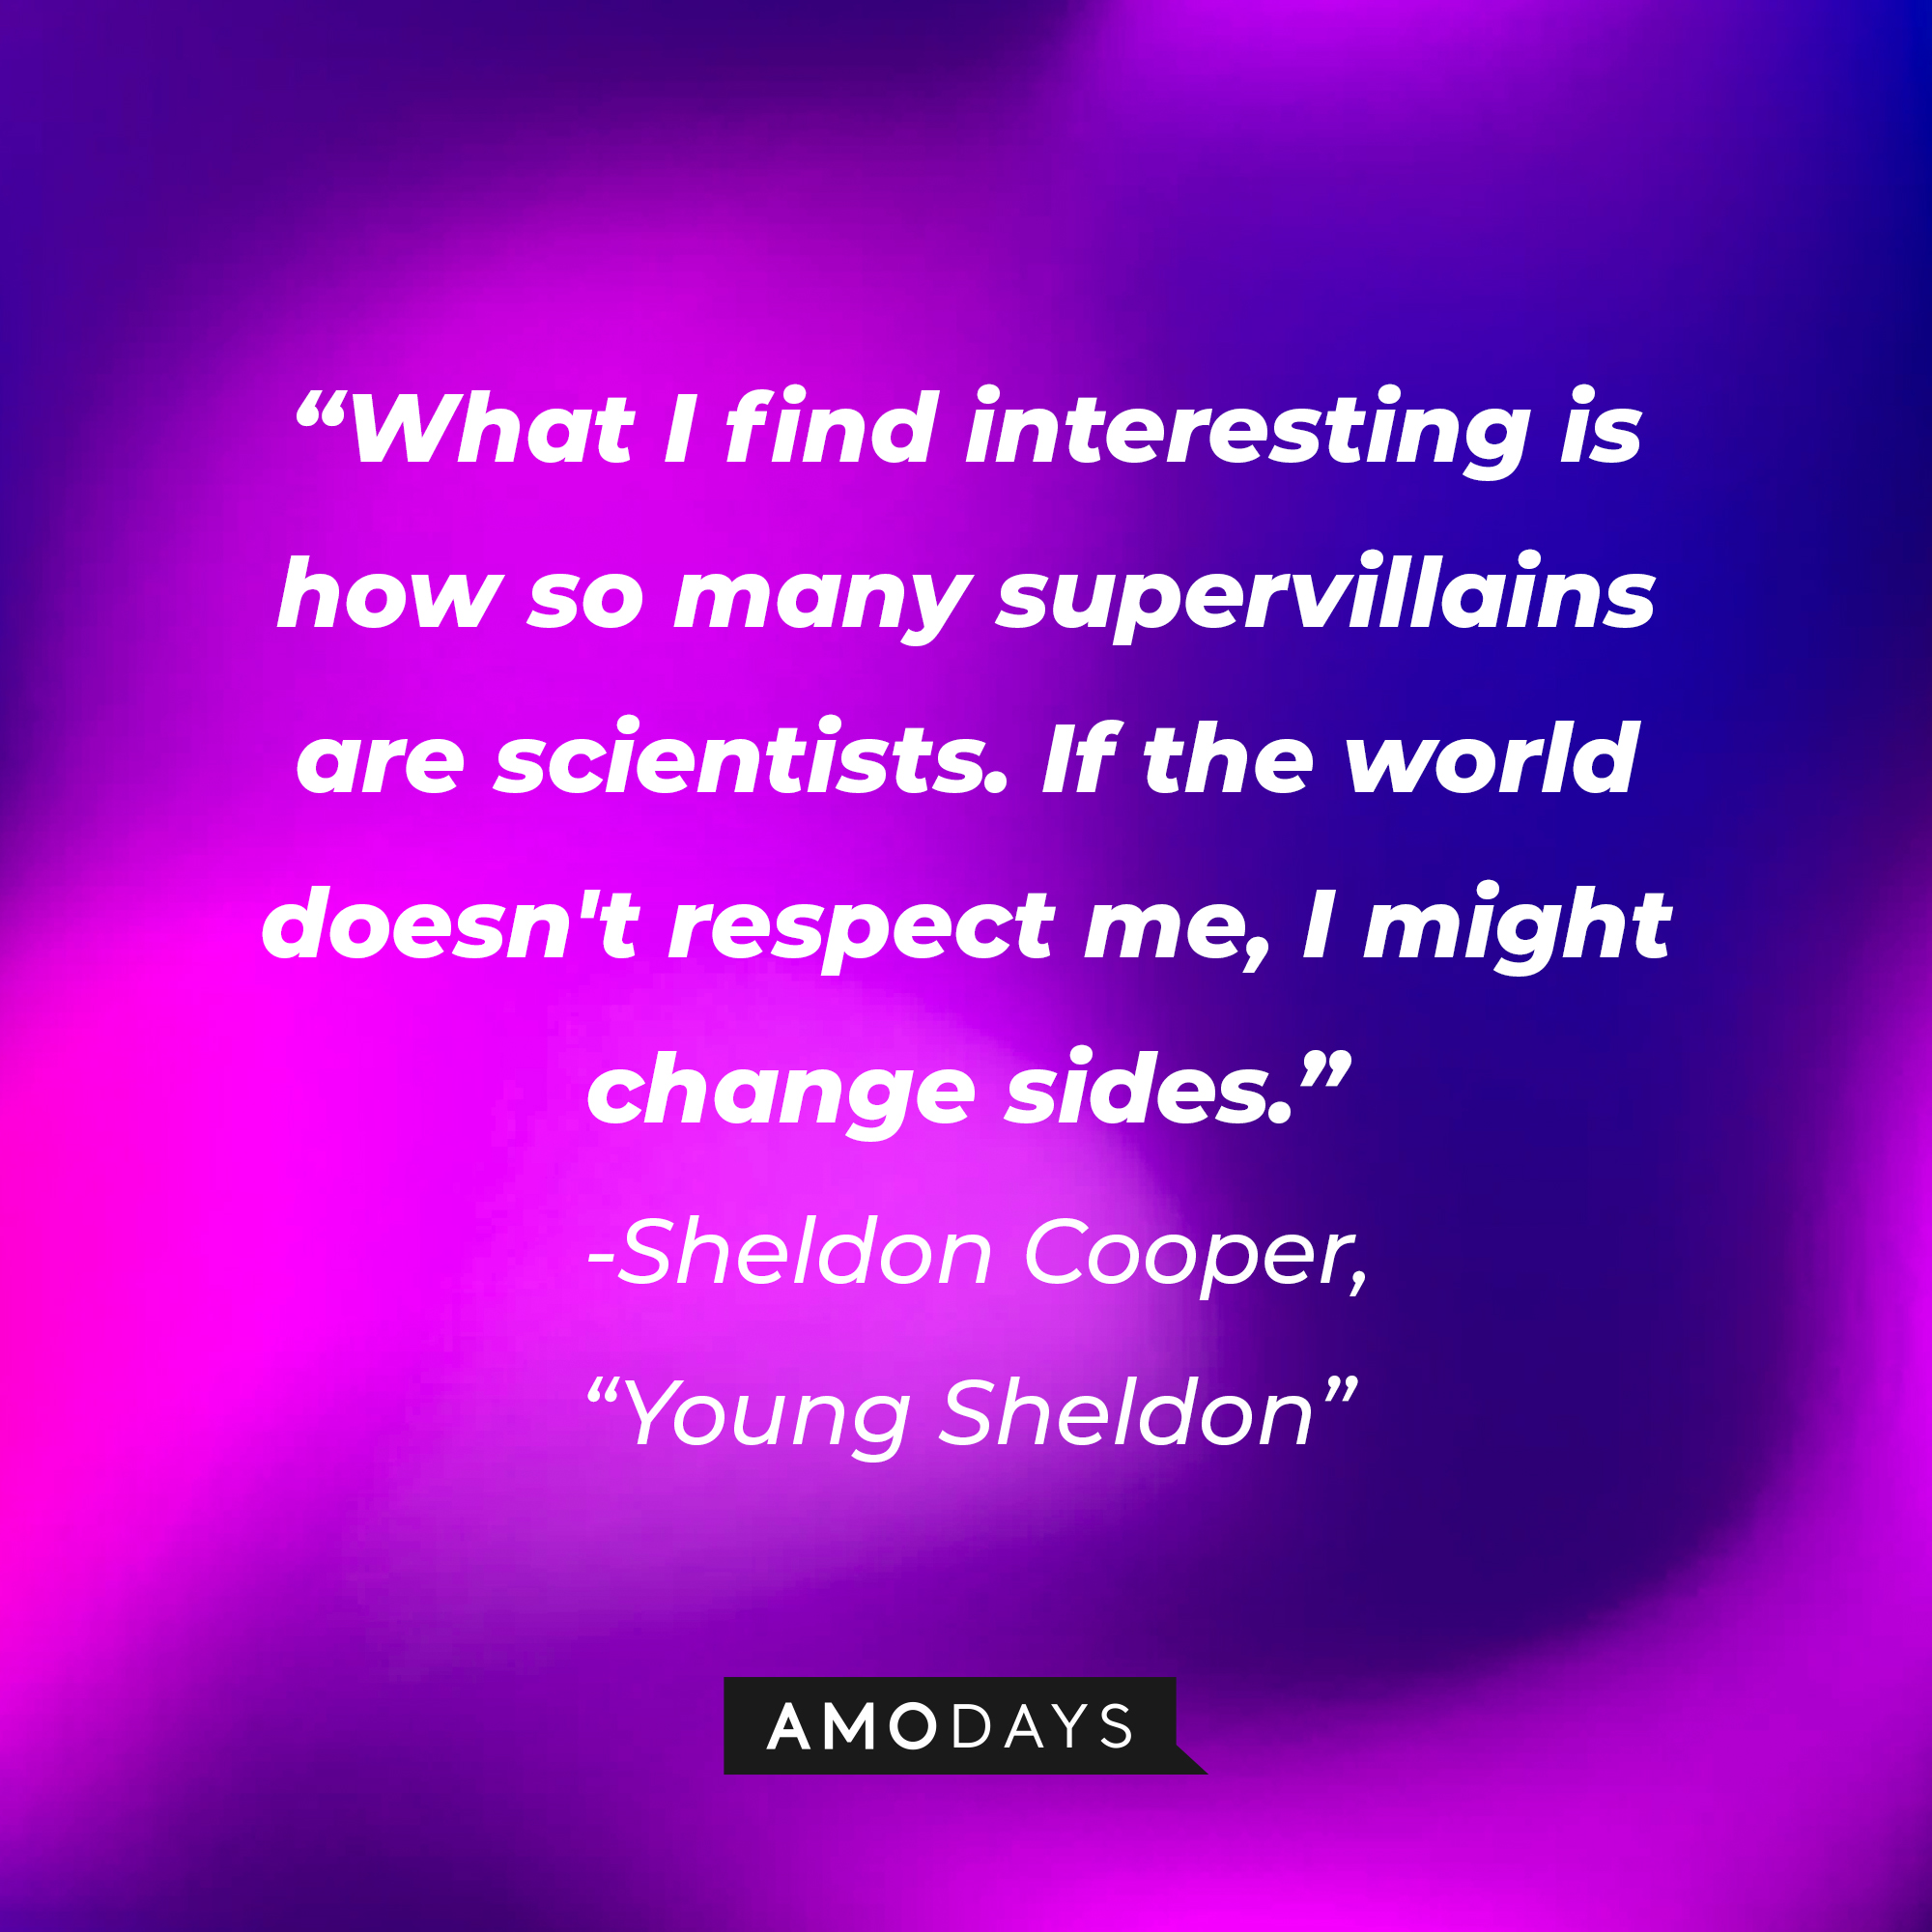 Sheldon Cooper's quote from "Young Sheldon": "What I find interesting is how so many supervillains are scientists. If the world doesn't respect me, I might change sides." | Source: Amodays